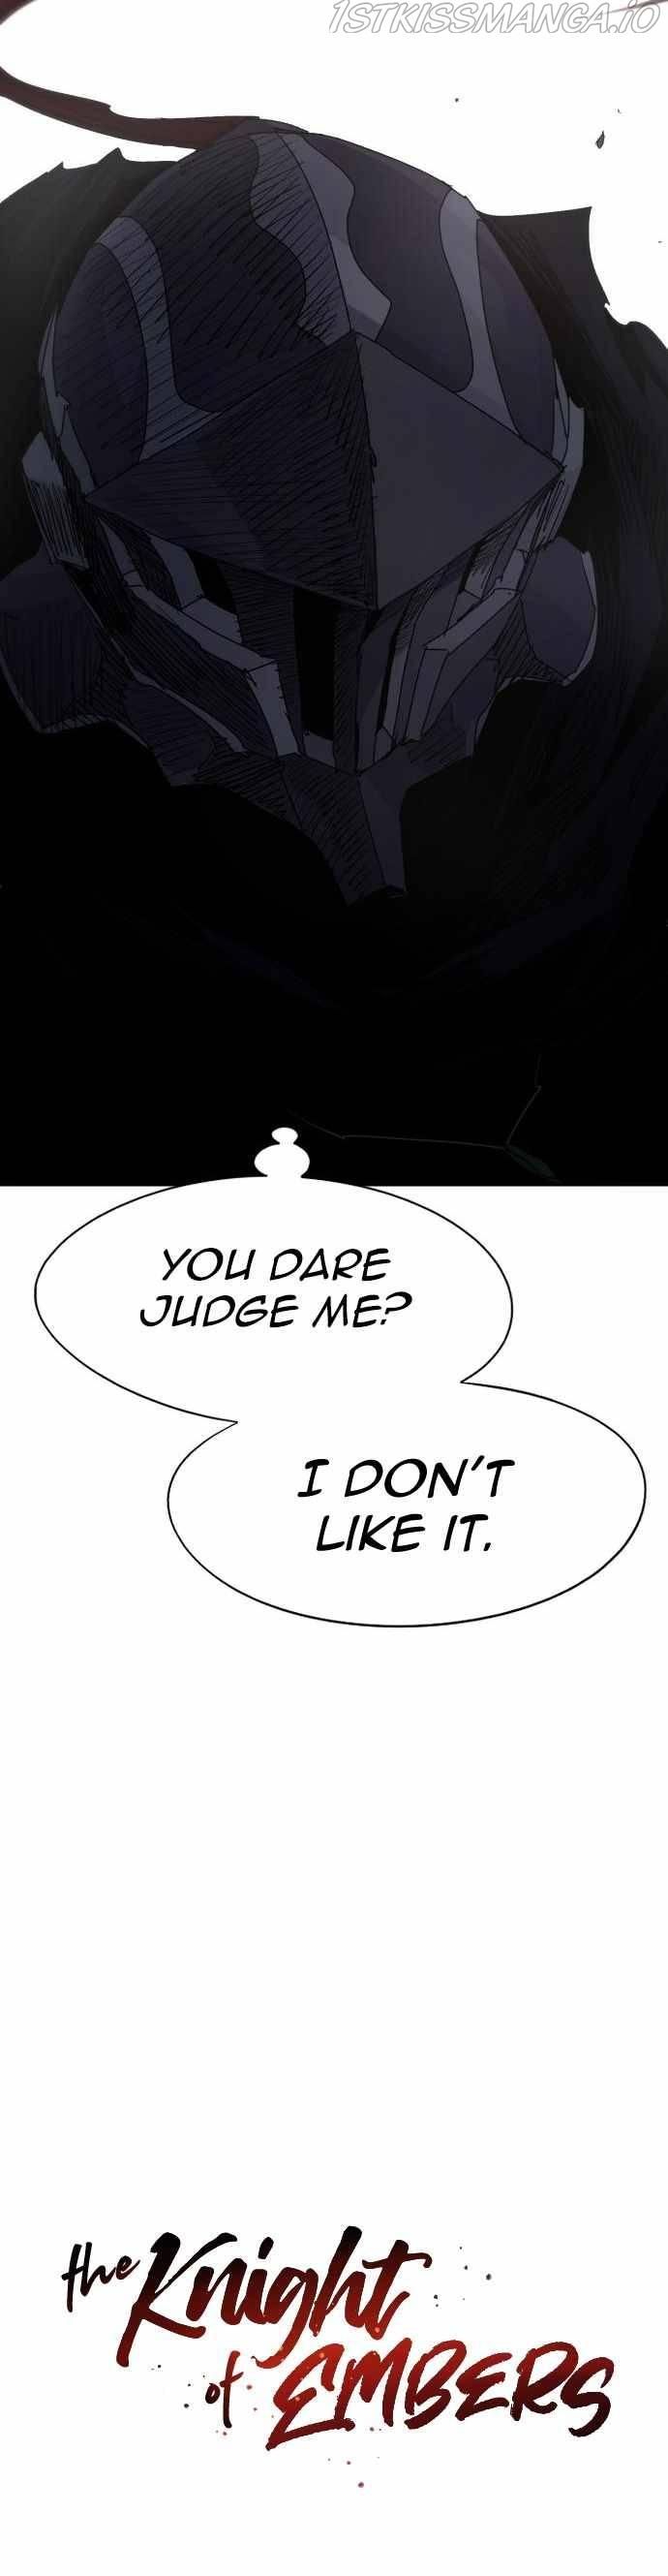 The Knight of Embers Chapter 82 page 6